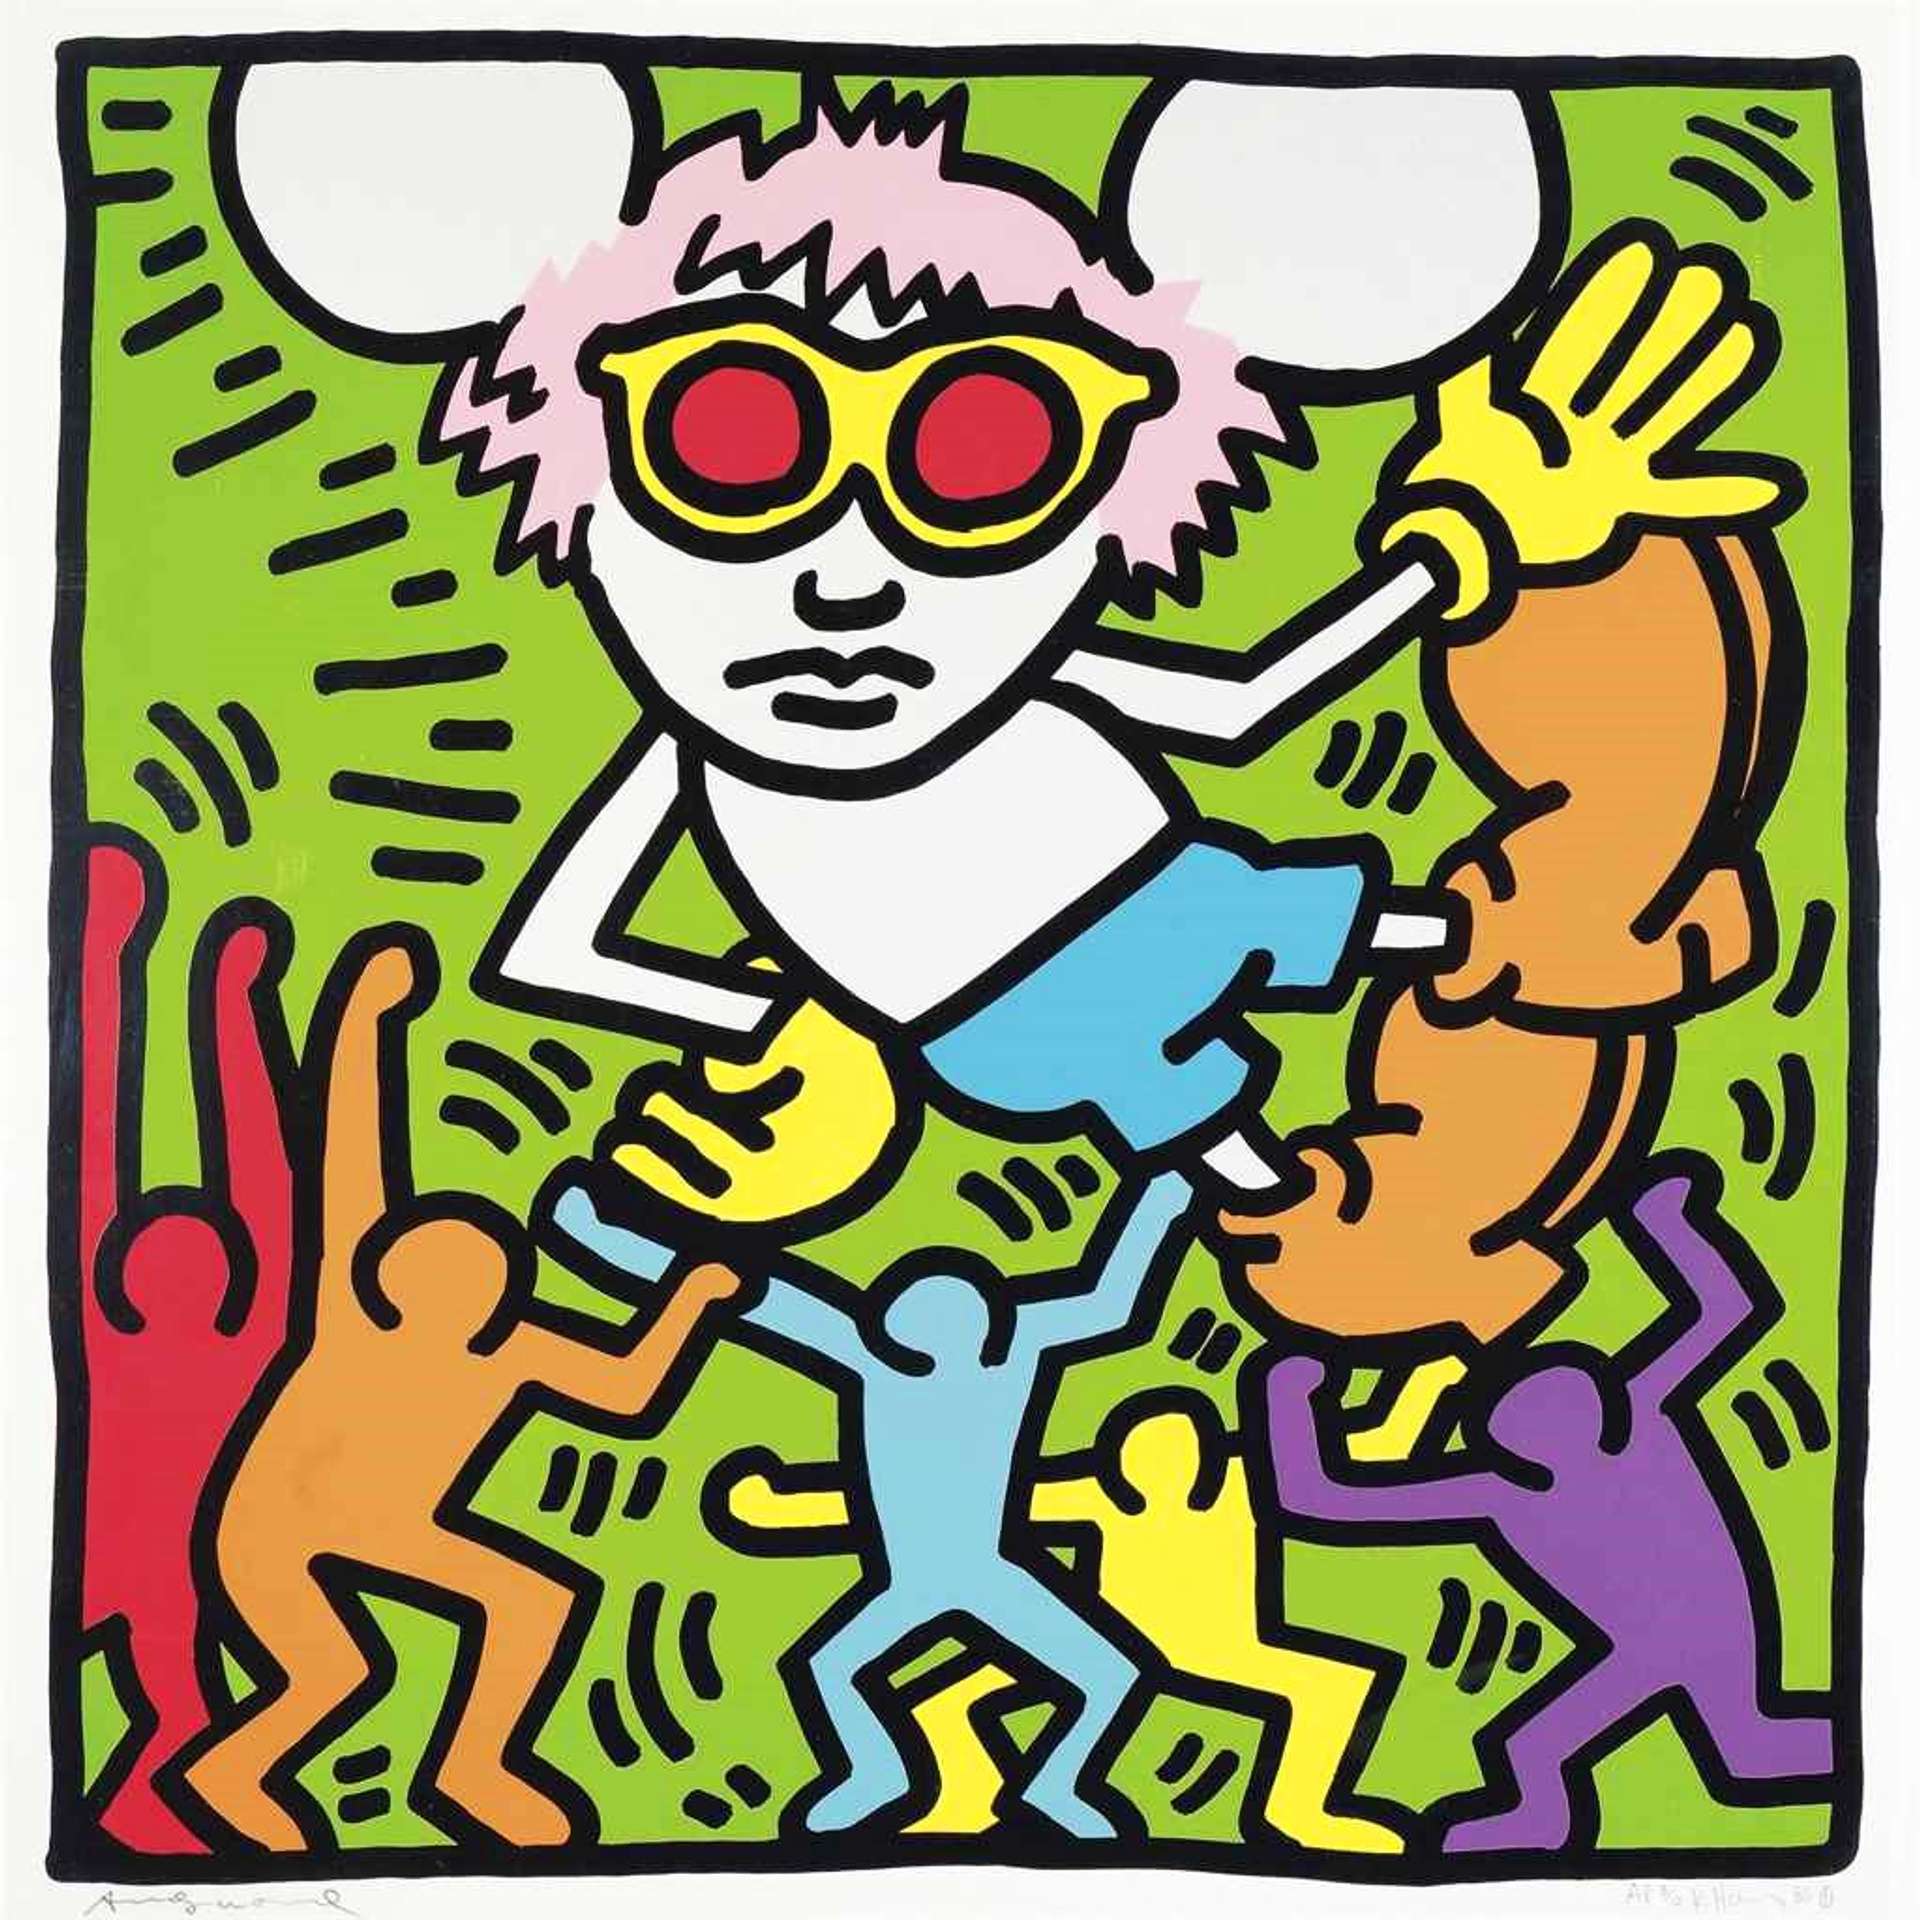 Keith Haring’s Andy Mouse 2. A Pop Art screenprint of Disney’s Mickey Mouse in the likeness of Andy Warhol held up by a crowd of moving figures. 